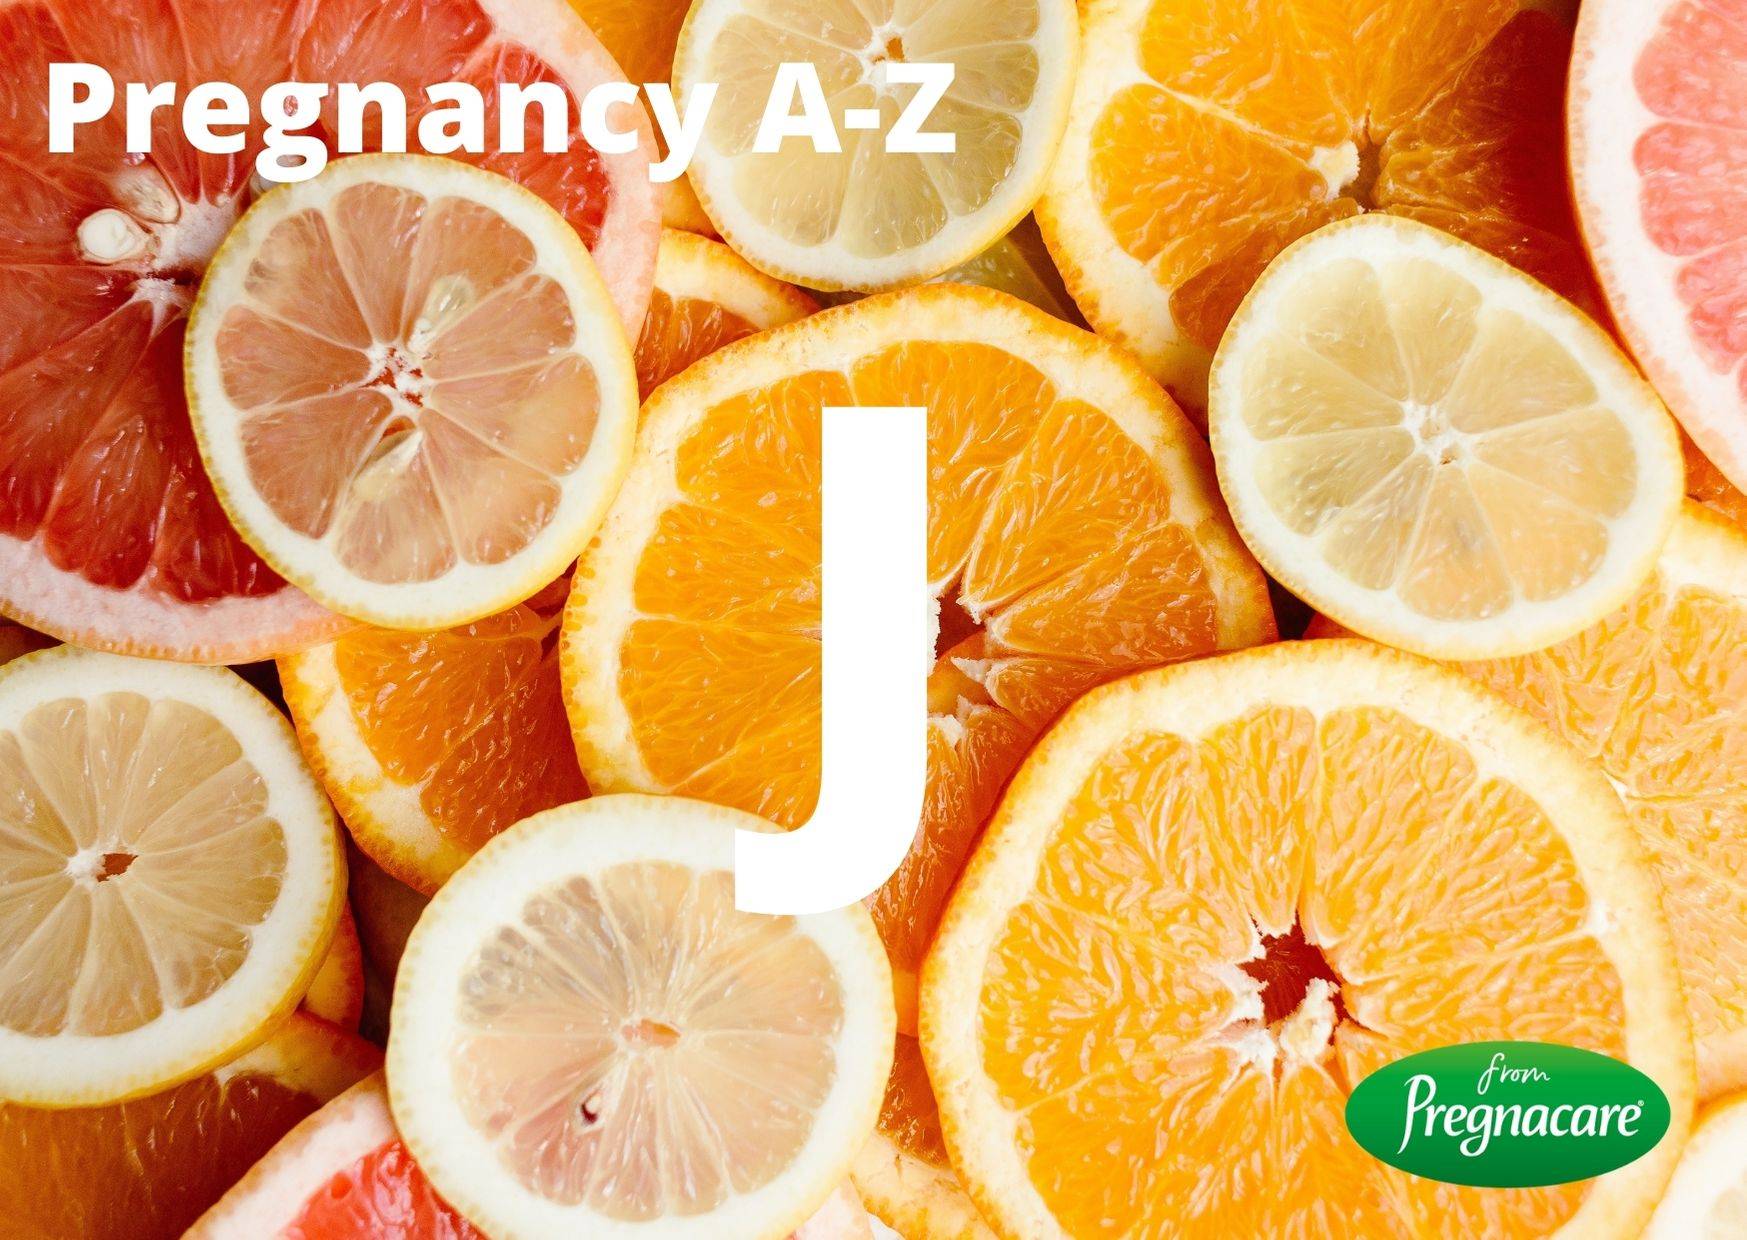 A-Z guide to pregnancy and nutrition, the letter J